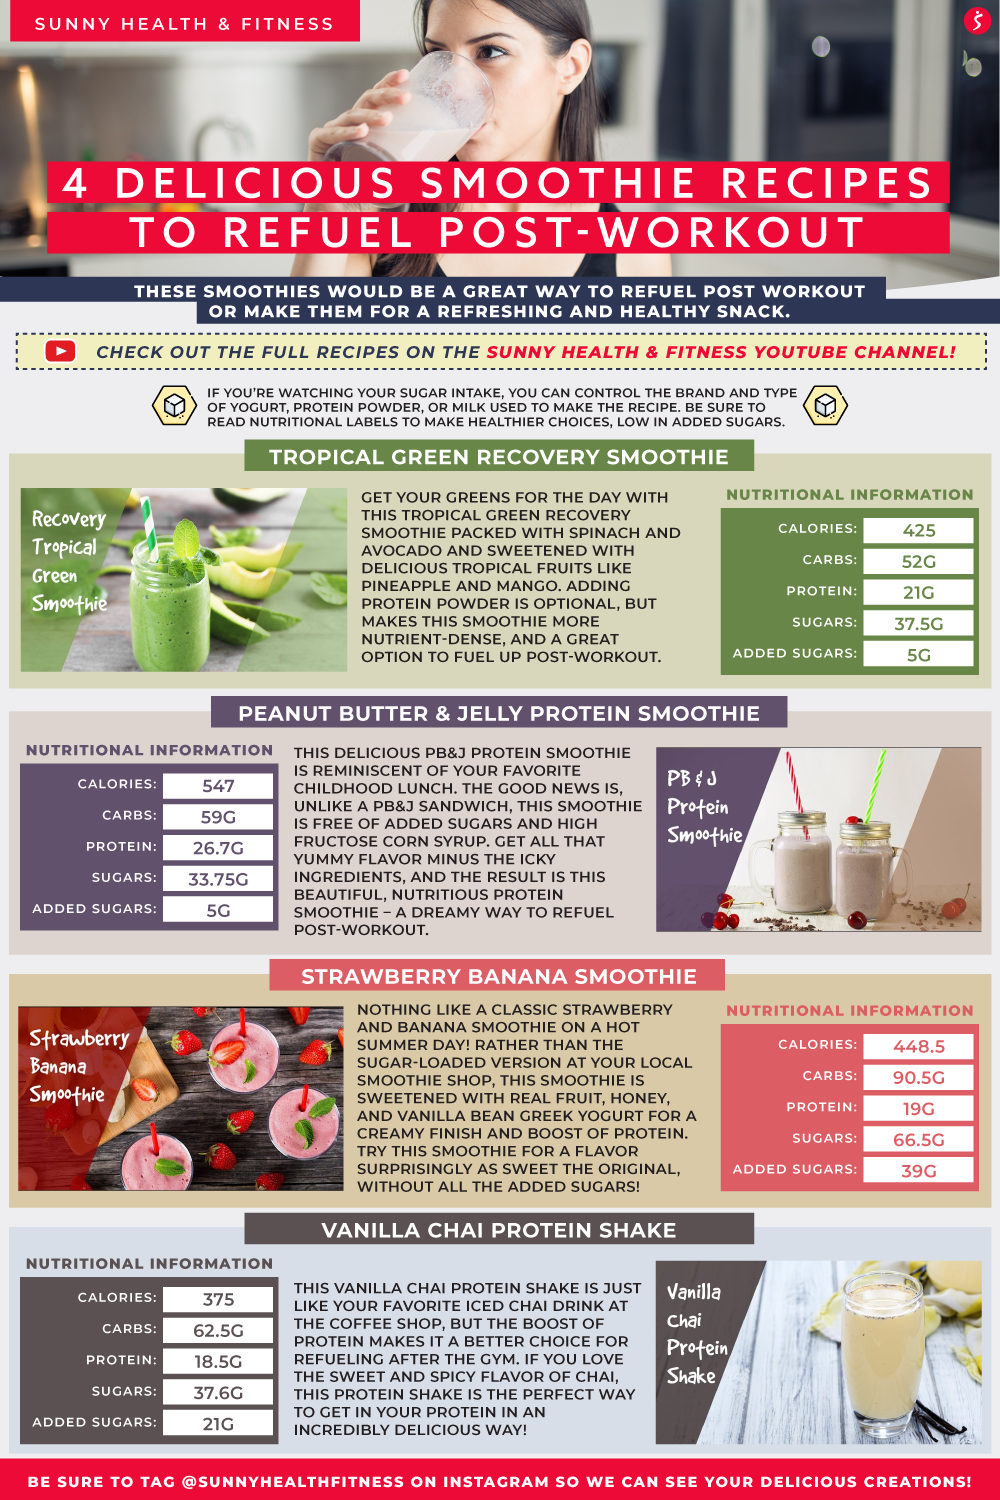 4 Delicious Smoothie Recipes to Refuel Post-Workout Infographic